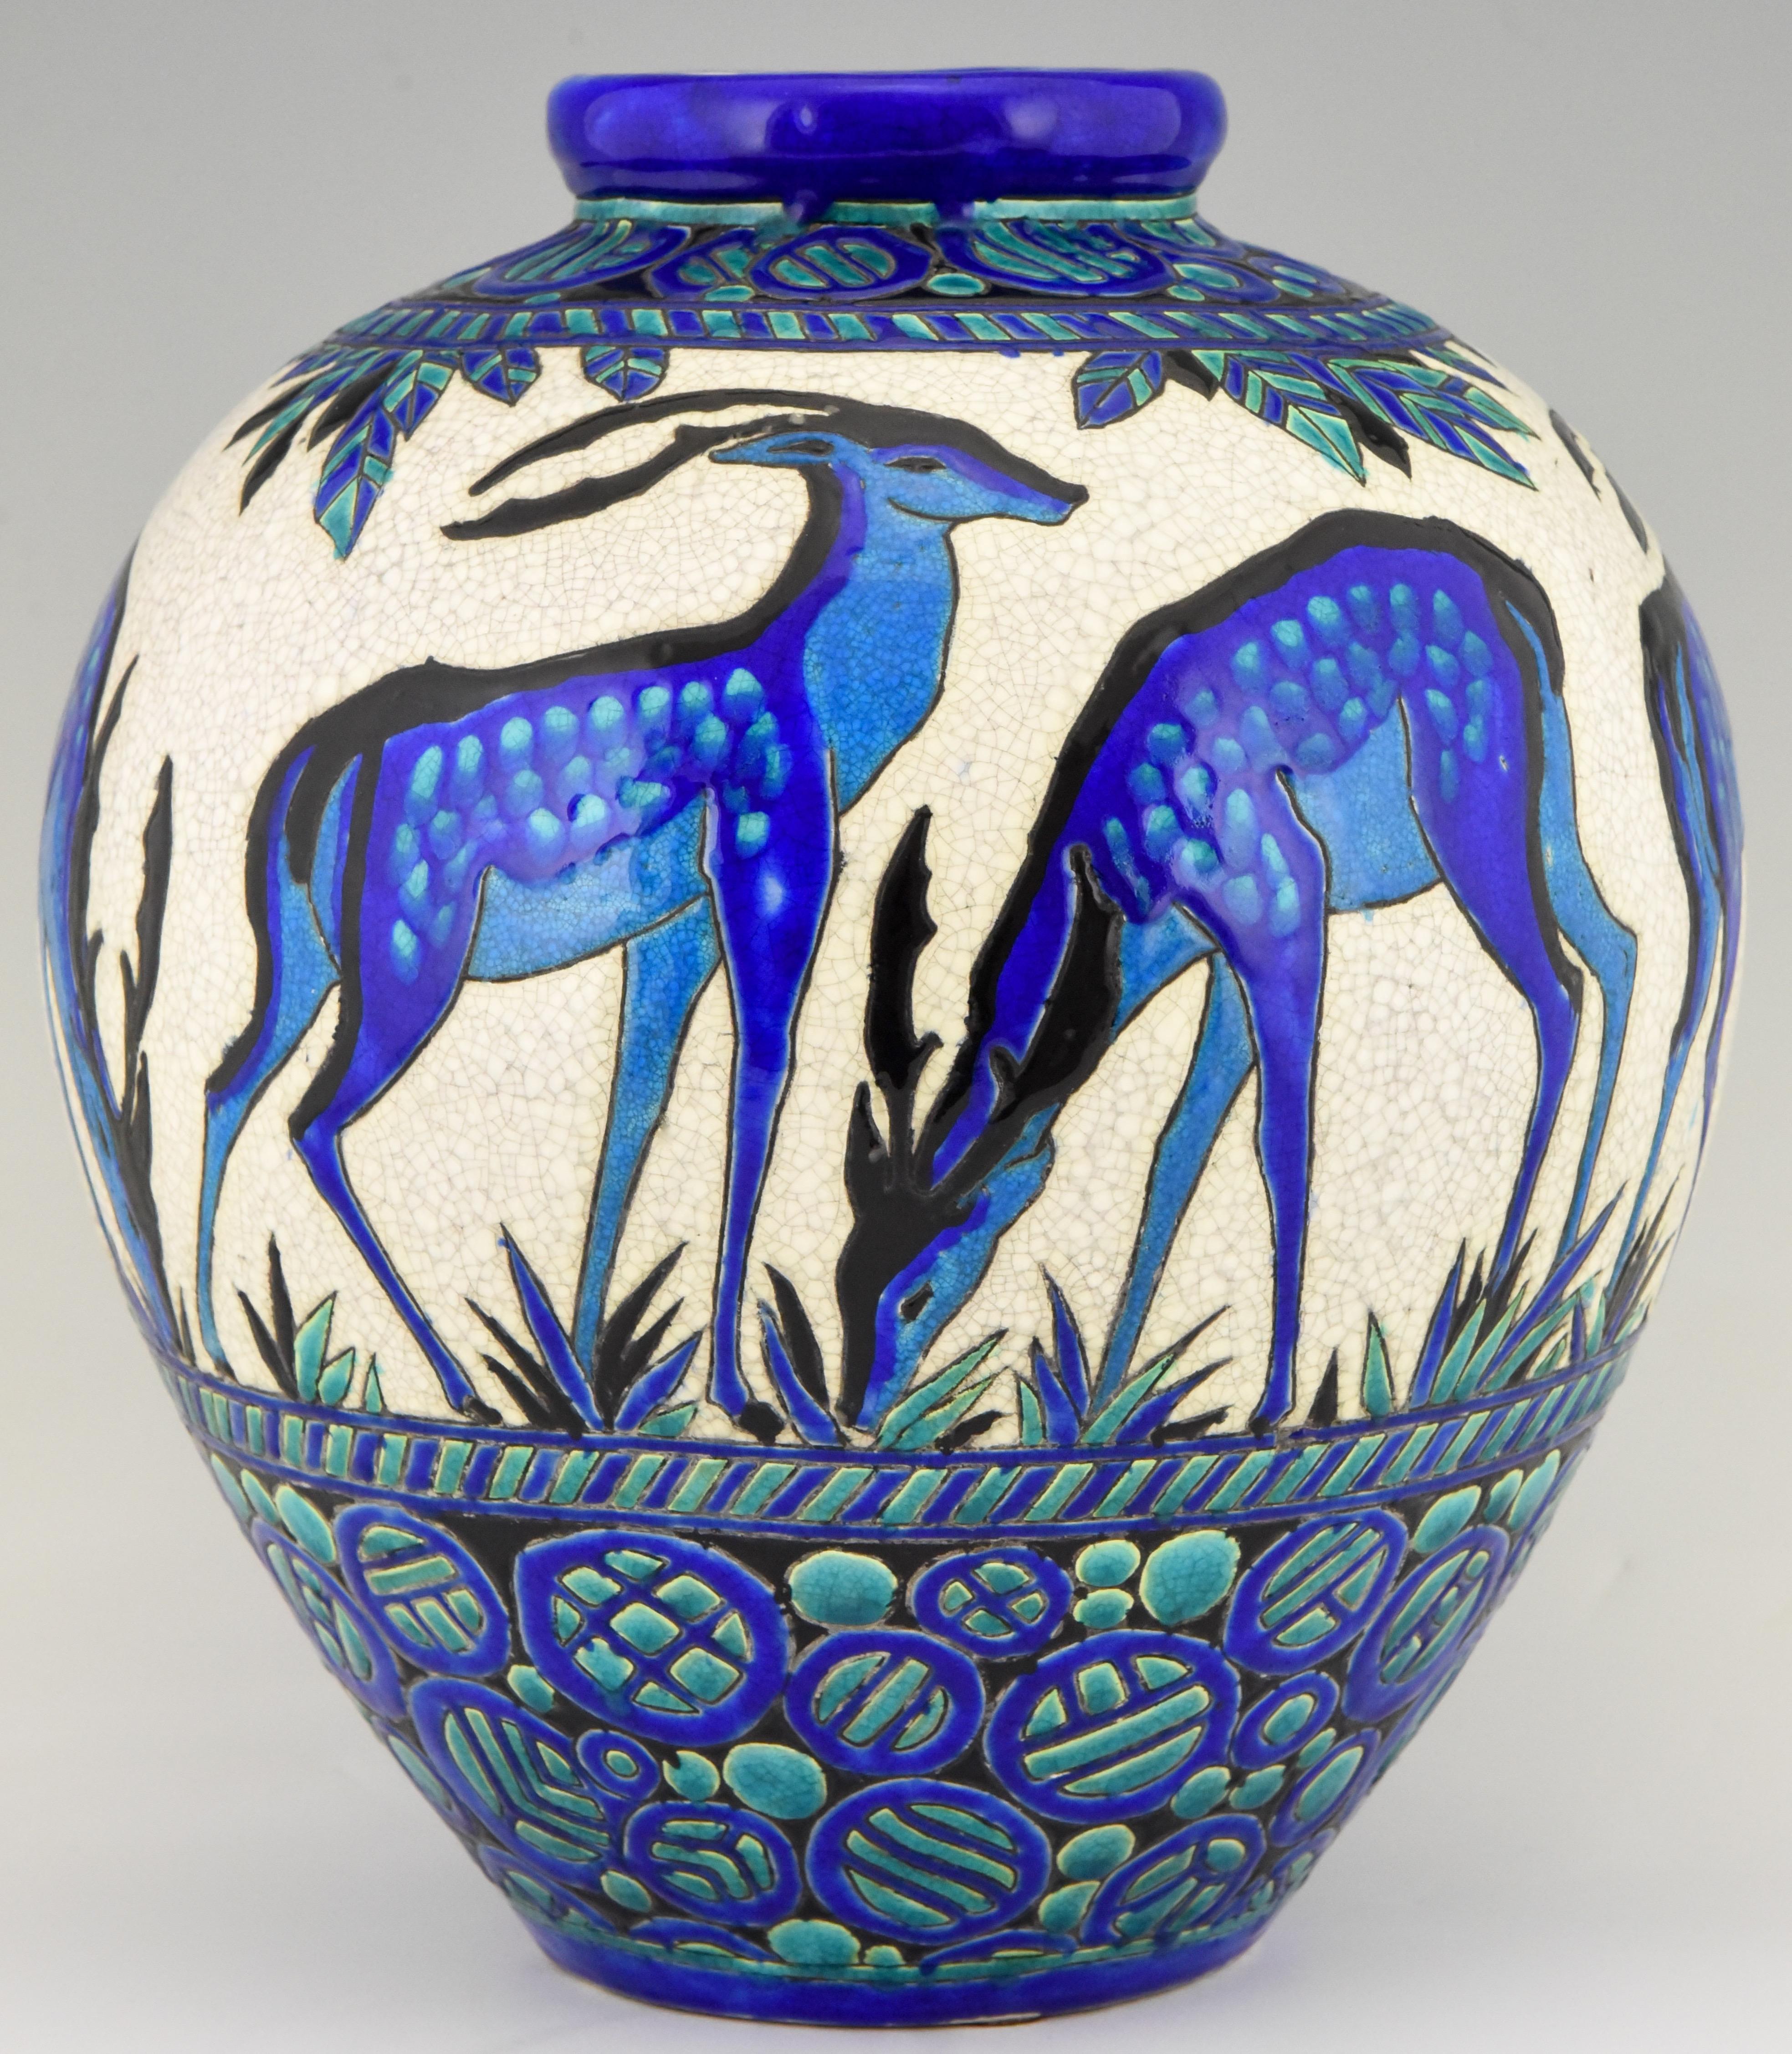 Charles Catteau Art Deco exceptional large deer vase, from the line Biches Bleues for Boch freres, La Louviere, Belgium.
Signed and numbered D 943 for the decor created between 1924-1925
The line was exhibited at the 1925 Exposition Internationale